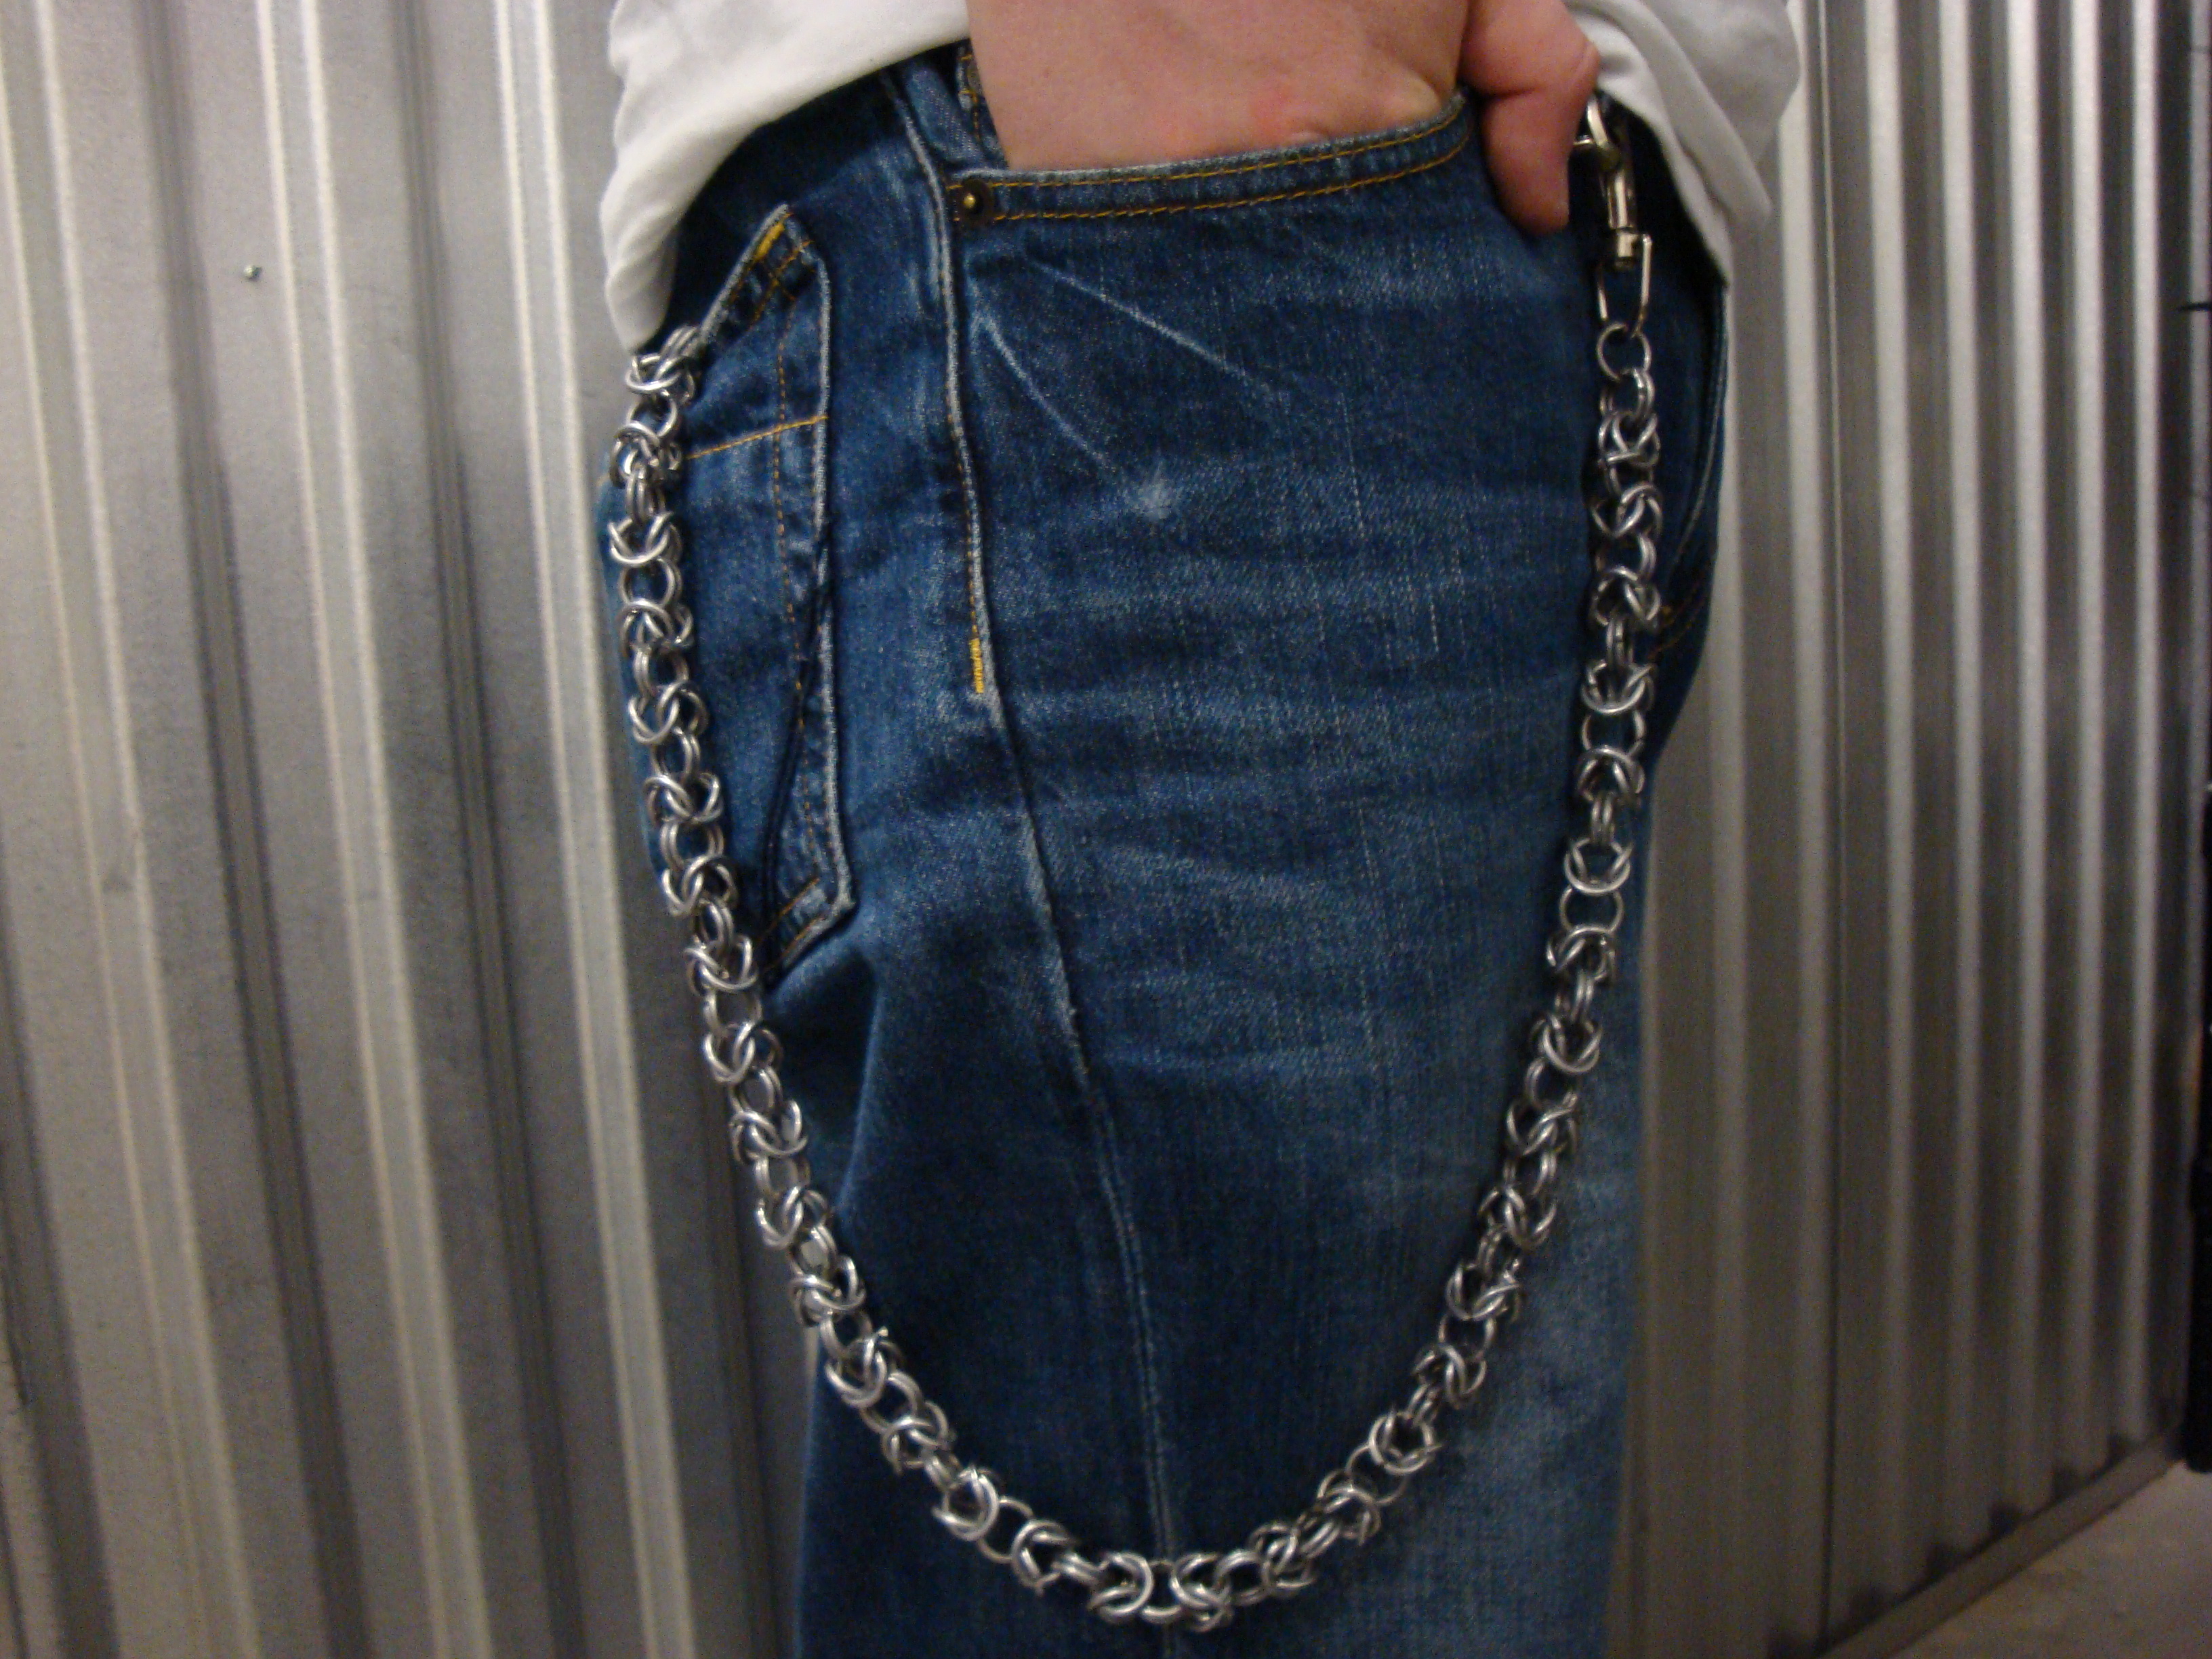 Wallet Chains Returning Back in Fashion - Fashion Style Trends 2016